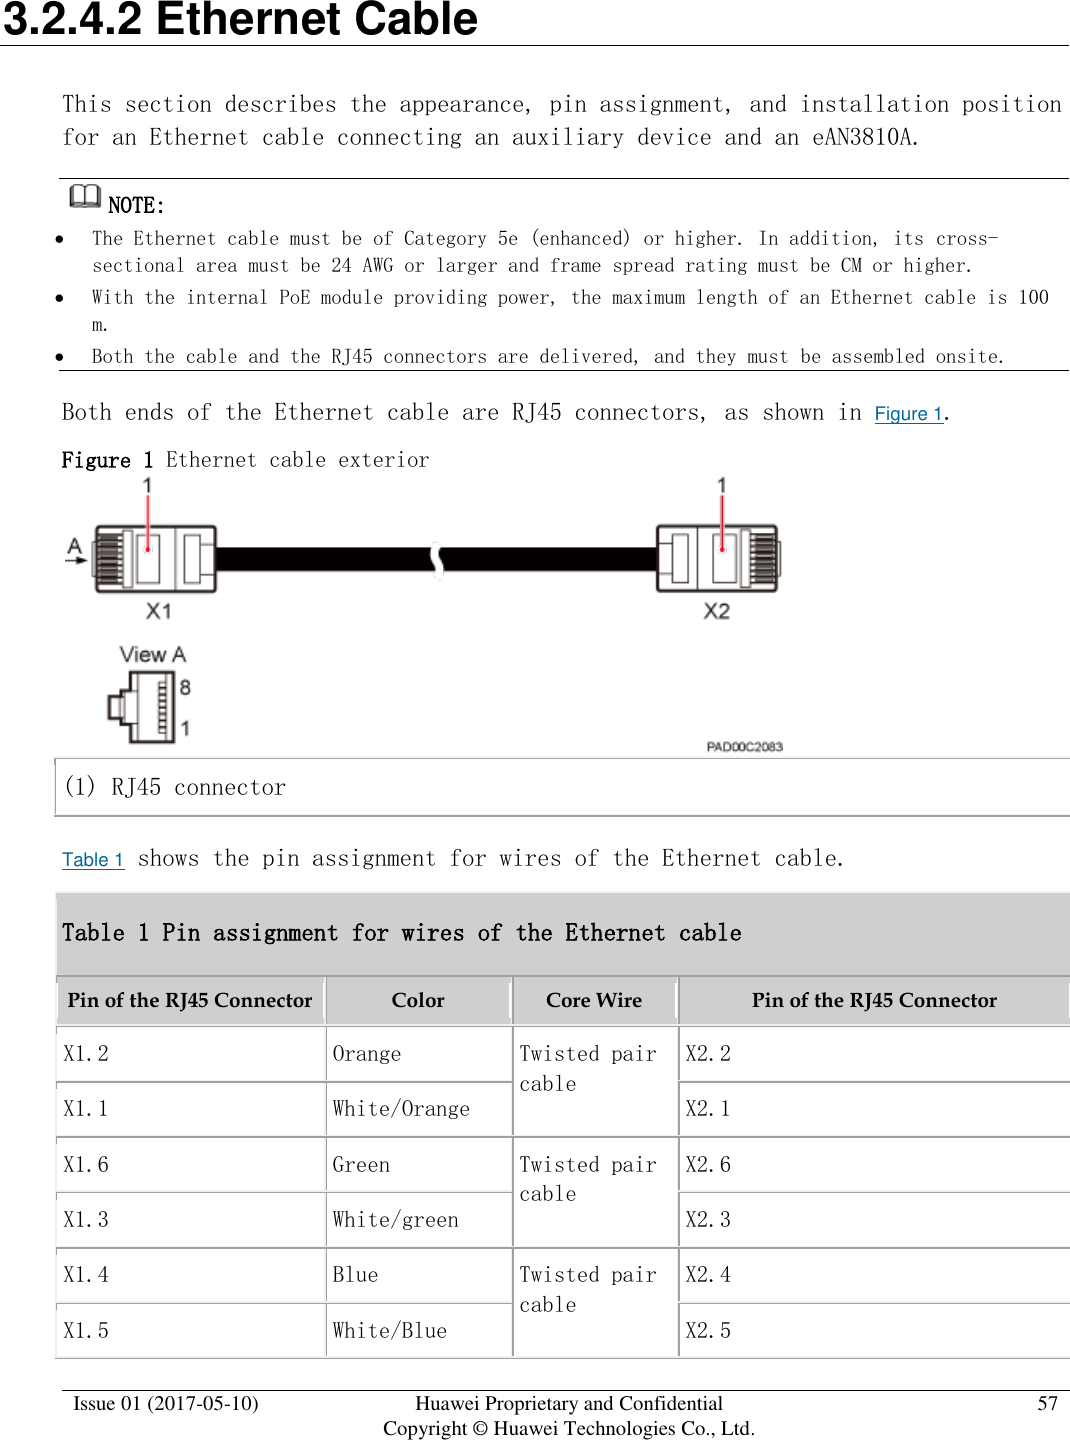  Issue 01 (2017-05-10) Huawei Proprietary and Confidential      Copyright © Huawei Technologies Co., Ltd. 57  3.2.4.2 Ethernet Cable This section describes the appearance, pin assignment, and installation position for an Ethernet cable connecting an auxiliary device and an eAN3810A. NOTE:   The Ethernet cable must be of Category 5e (enhanced) or higher. In addition, its cross-sectional area must be 24 AWG or larger and frame spread rating must be CM or higher.  With the internal PoE module providing power, the maximum length of an Ethernet cable is 100 m.  Both the cable and the RJ45 connectors are delivered, and they must be assembled onsite. Both ends of the Ethernet cable are RJ45 connectors, as shown in Figure 1. Figure 1 Ethernet cable exterior   (1) RJ45 connector Table 1 shows the pin assignment for wires of the Ethernet cable.  Table 1 Pin assignment for wires of the Ethernet cable Pin of the RJ45 Connector Color Core Wire Pin of the RJ45 Connector X1.2 Orange Twisted pair cable X2.2 X1.1 White/Orange X2.1 X1.6 Green Twisted pair cable X2.6 X1.3 White/green X2.3 X1.4 Blue Twisted pair cable X2.4 X1.5 White/Blue X2.5 